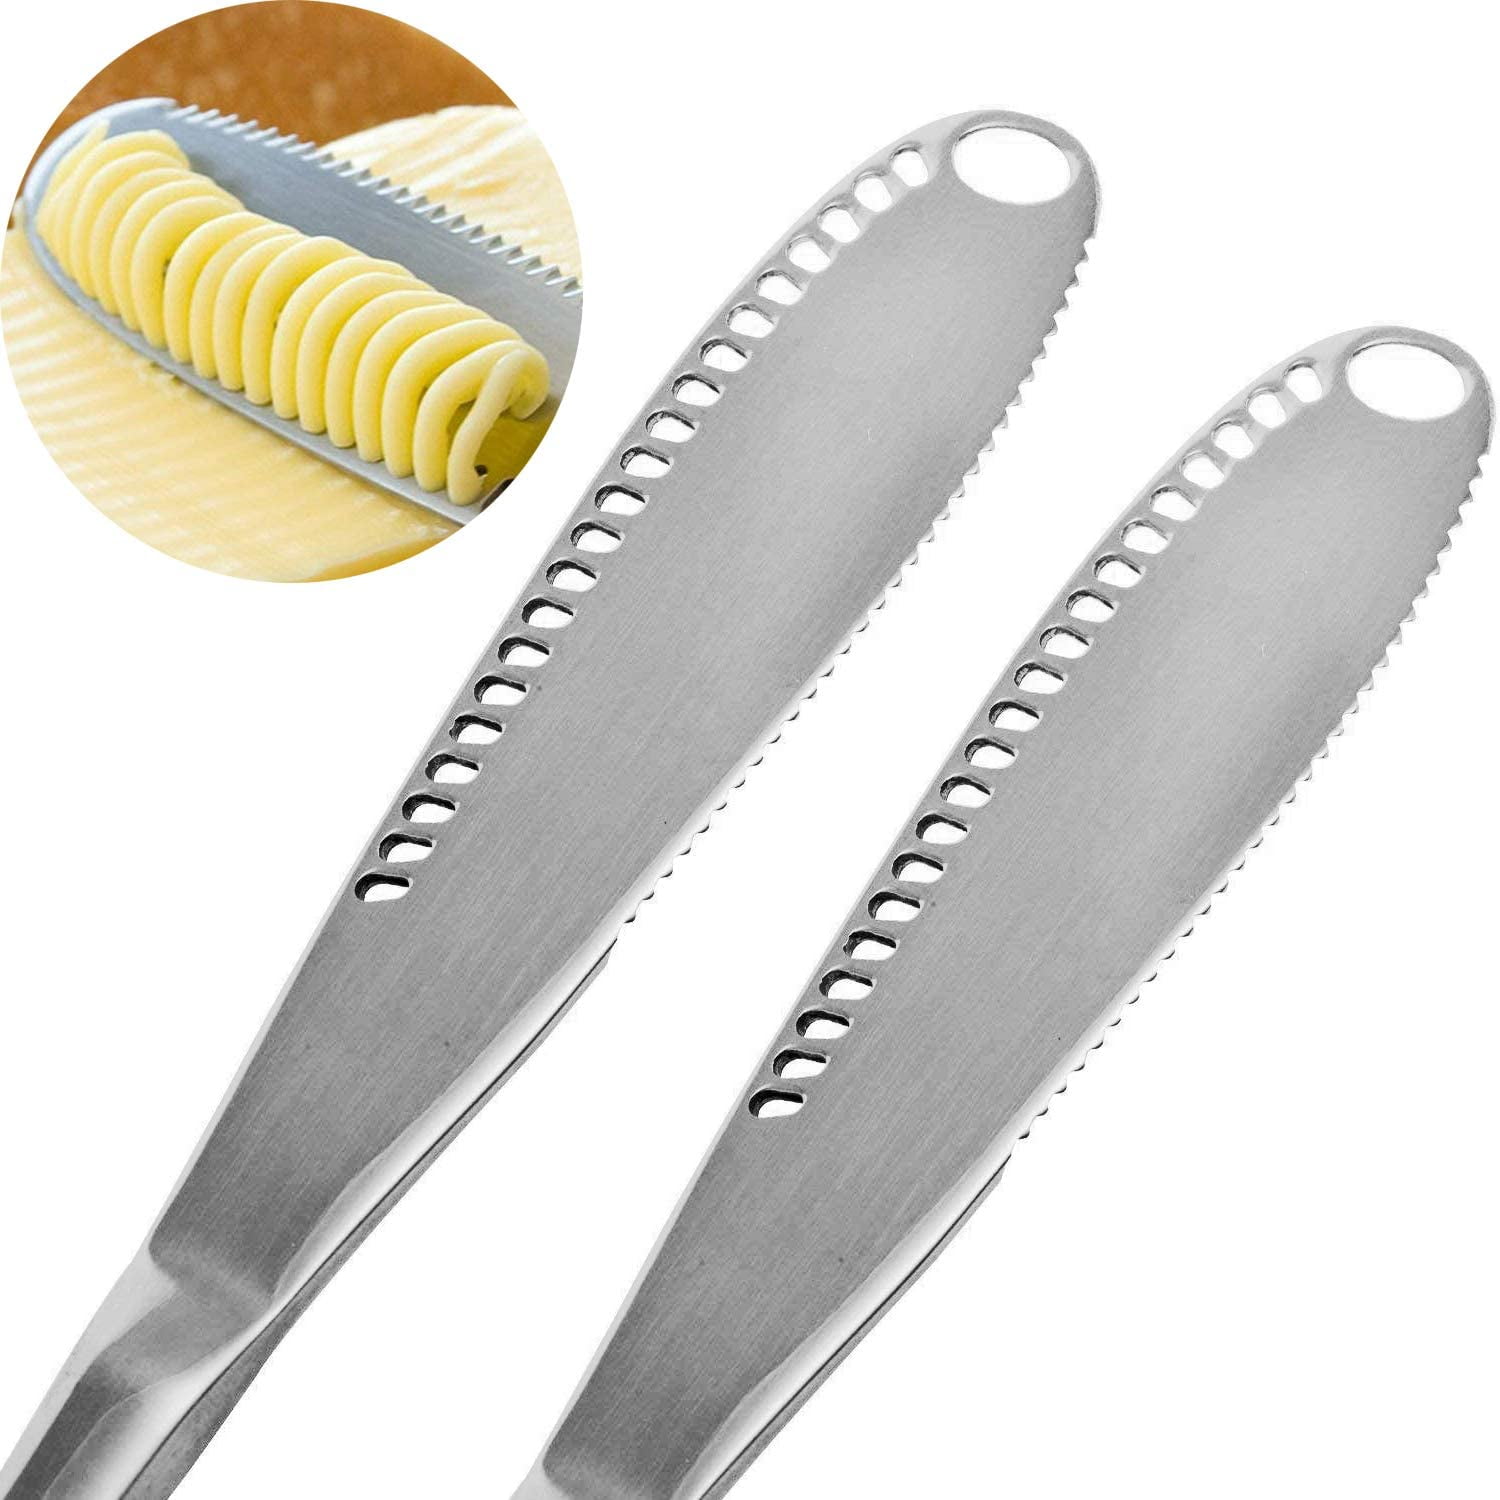  tinysiry Butter Knives, Butter Spreader Knife, Multifunctional  Butter Cutter with 3D Right Angle Cutting, Graduated Metering and Equal  Cutting, Butter Grater, Butter Slicer White : Home & Kitchen